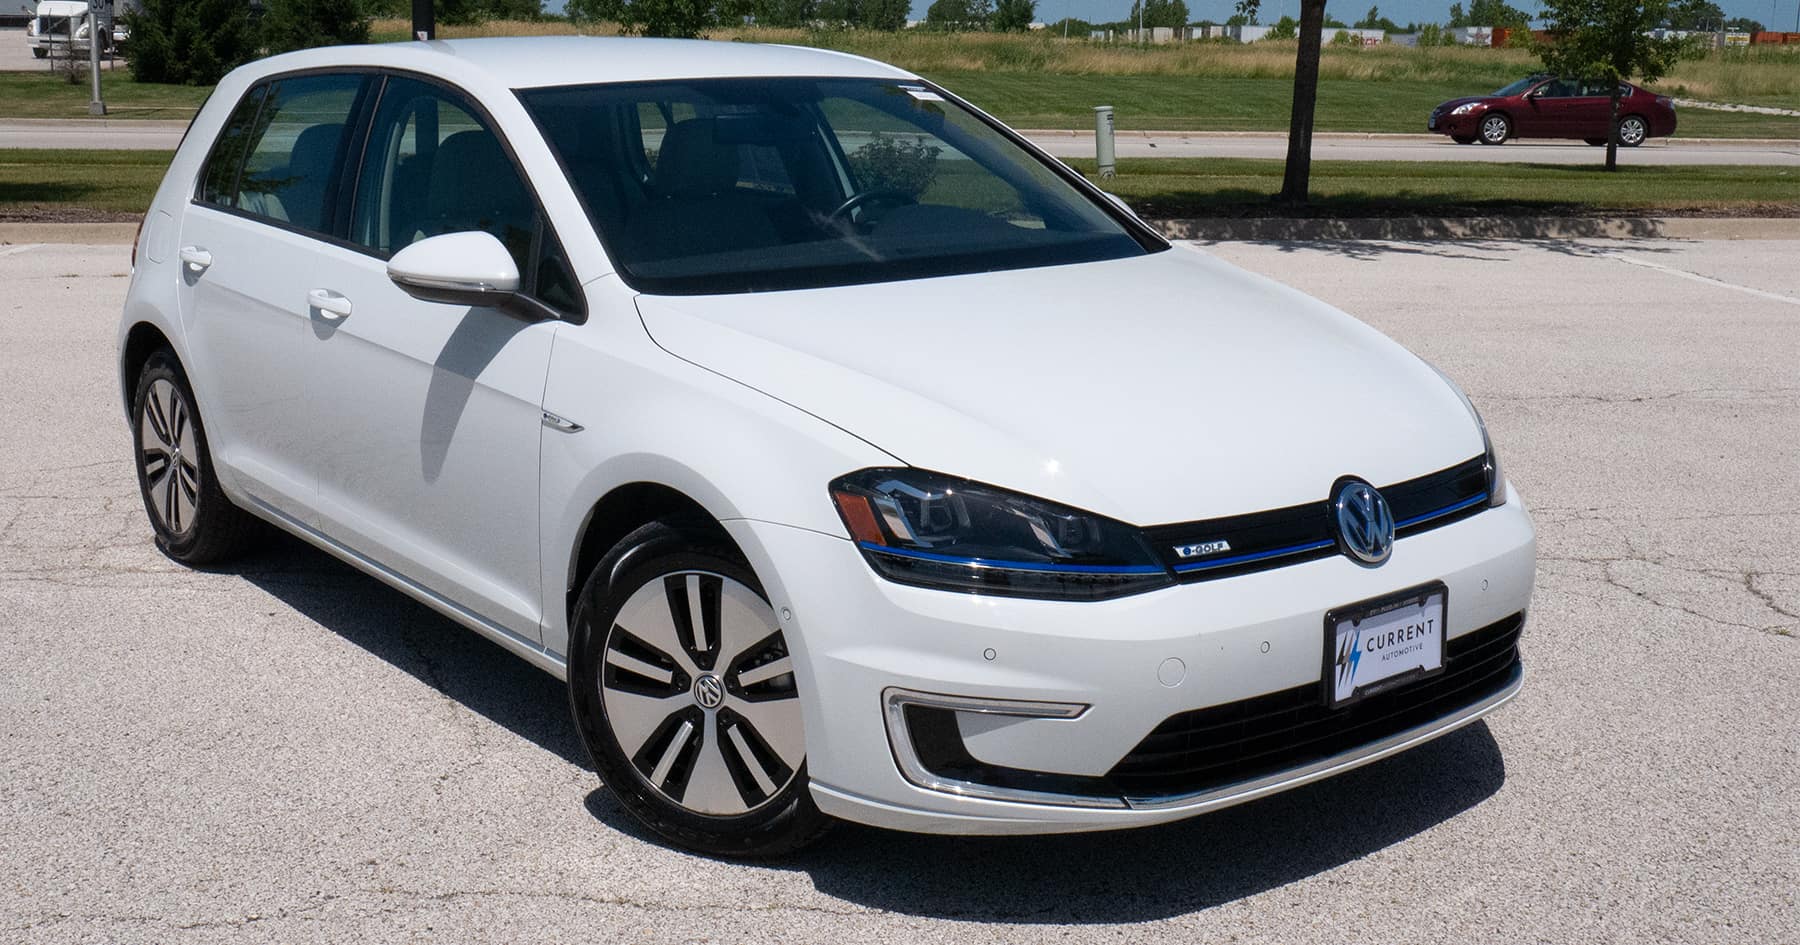 Volkswagen e-Golf Review - features, trims, specs, and buyer's guide |  Current Automotive